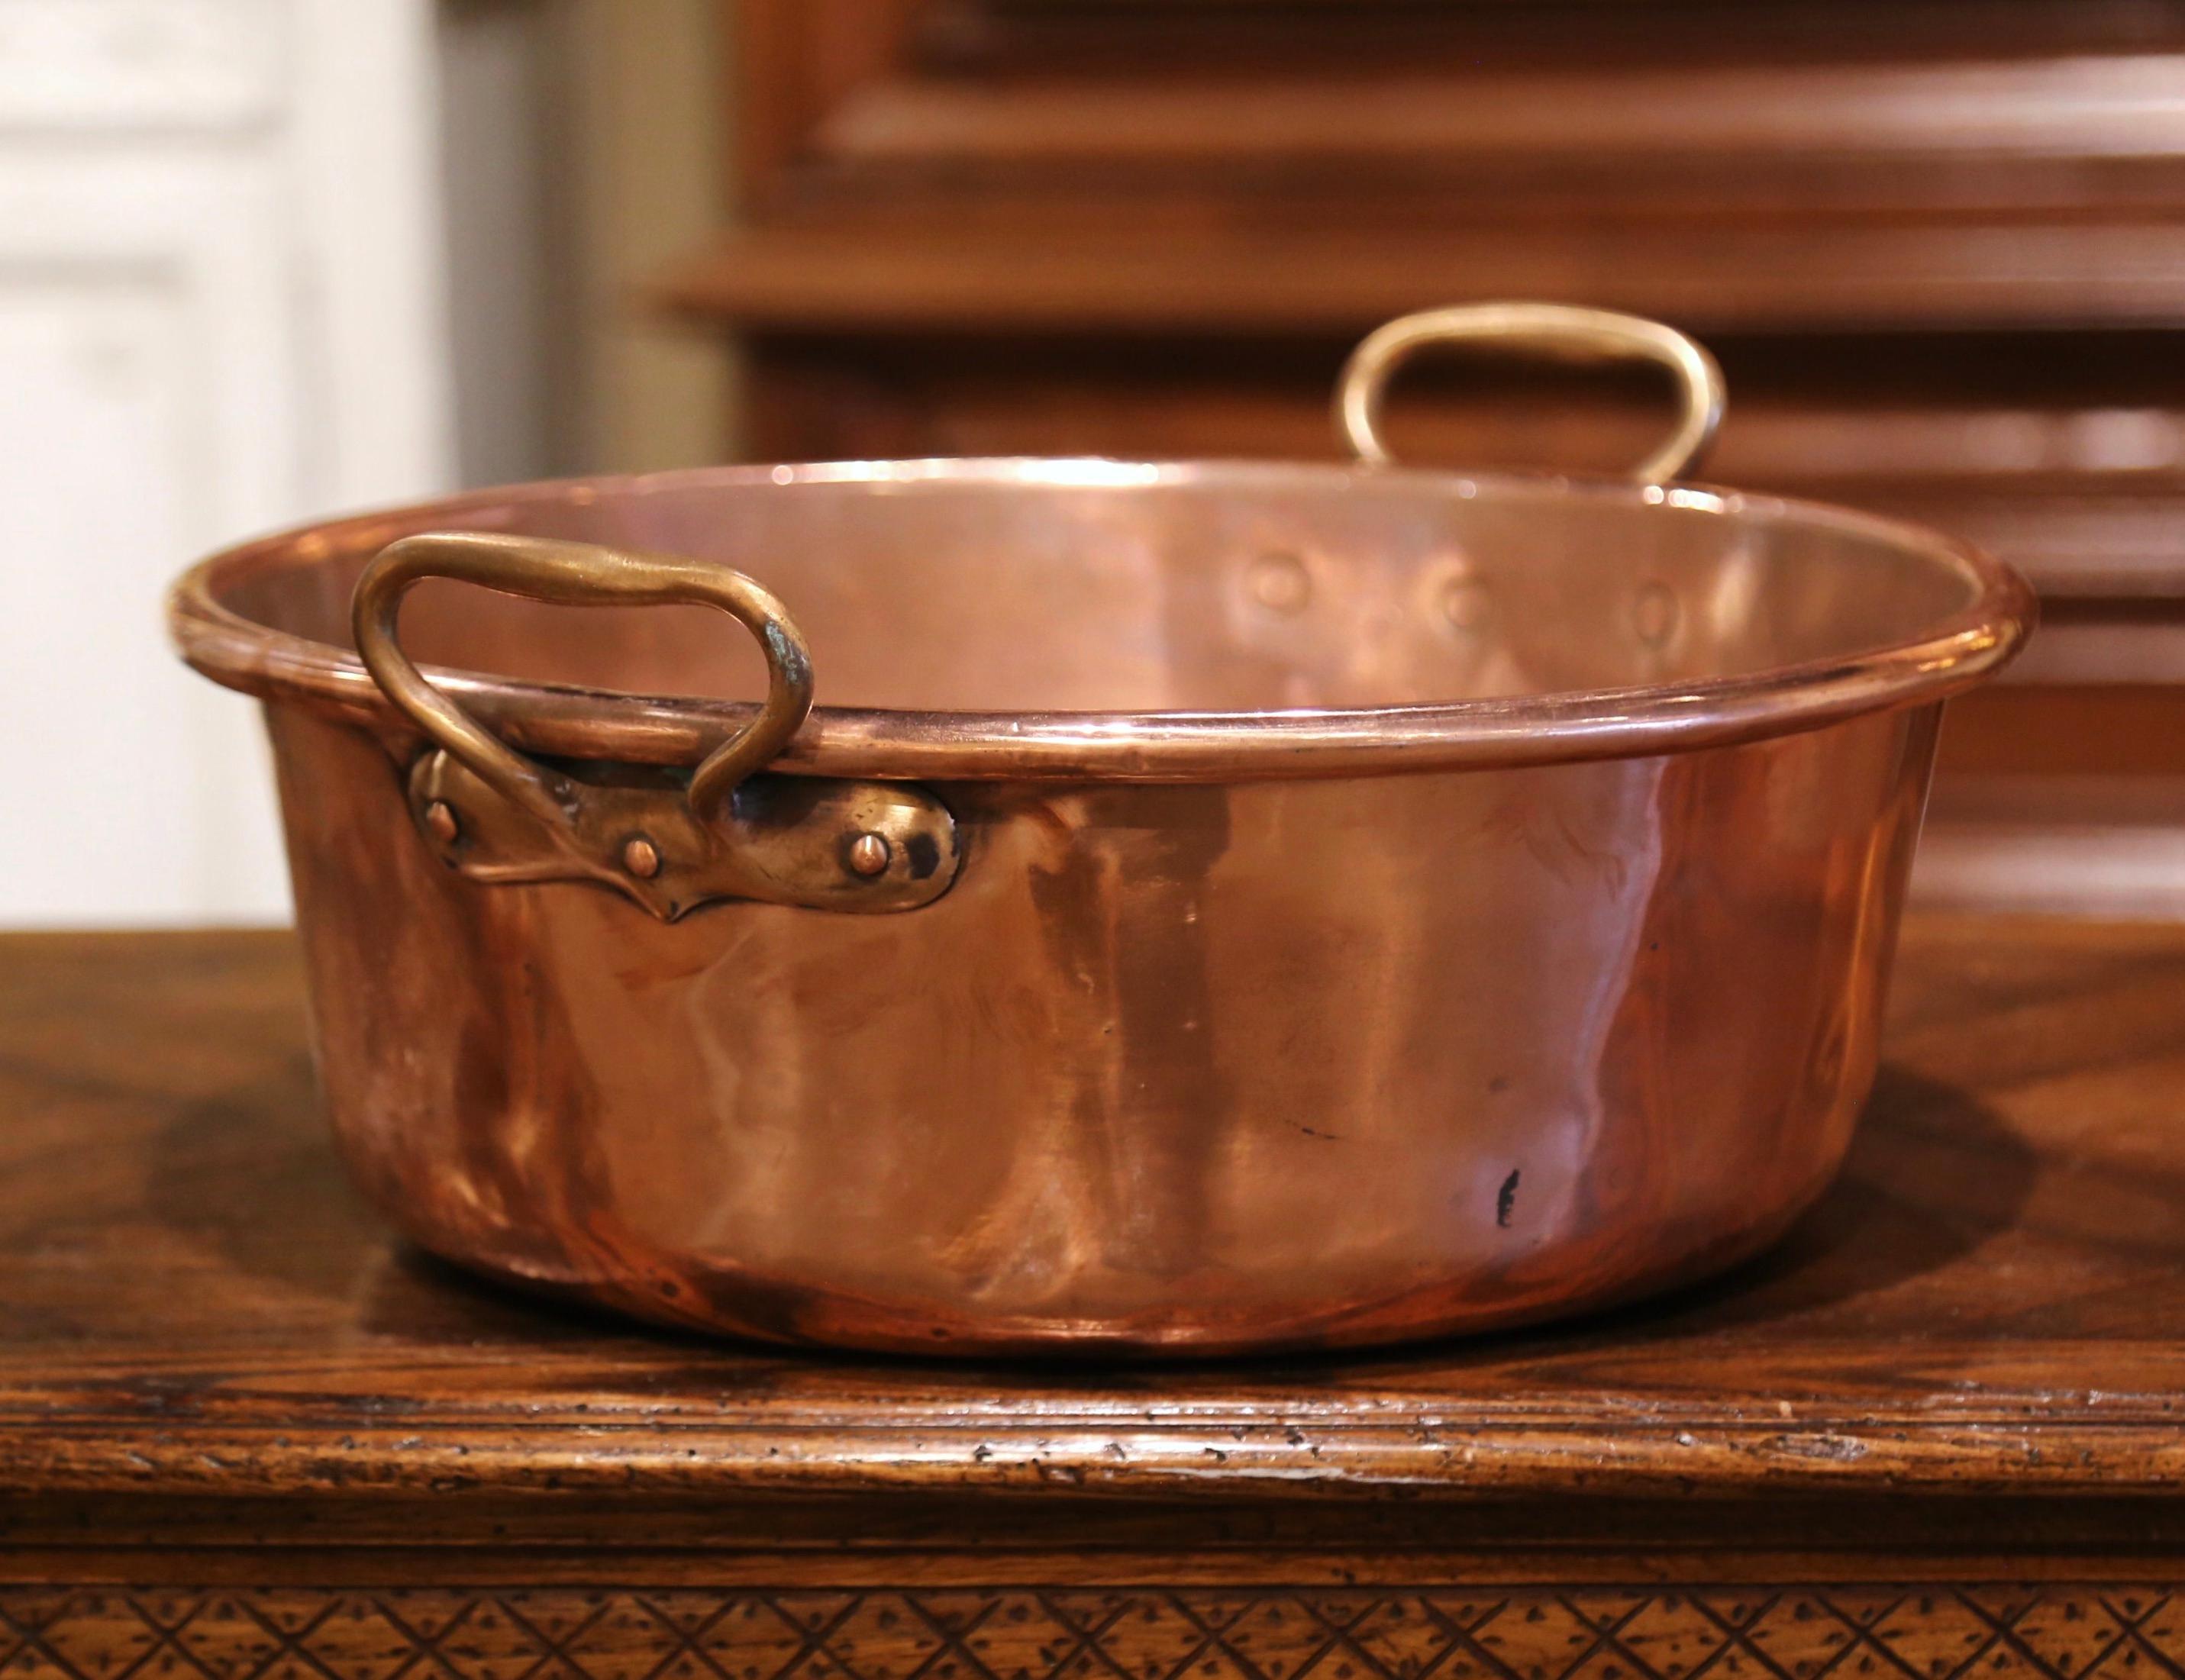 Bring an authentic French countryside touch to your kitchen with this large antique copper marmalade bowl. Crafted in Normandy, France, circa 1870, the decorative “Bassine a Confiture” (jam bowl) is round in shape and dressed with two brass handles